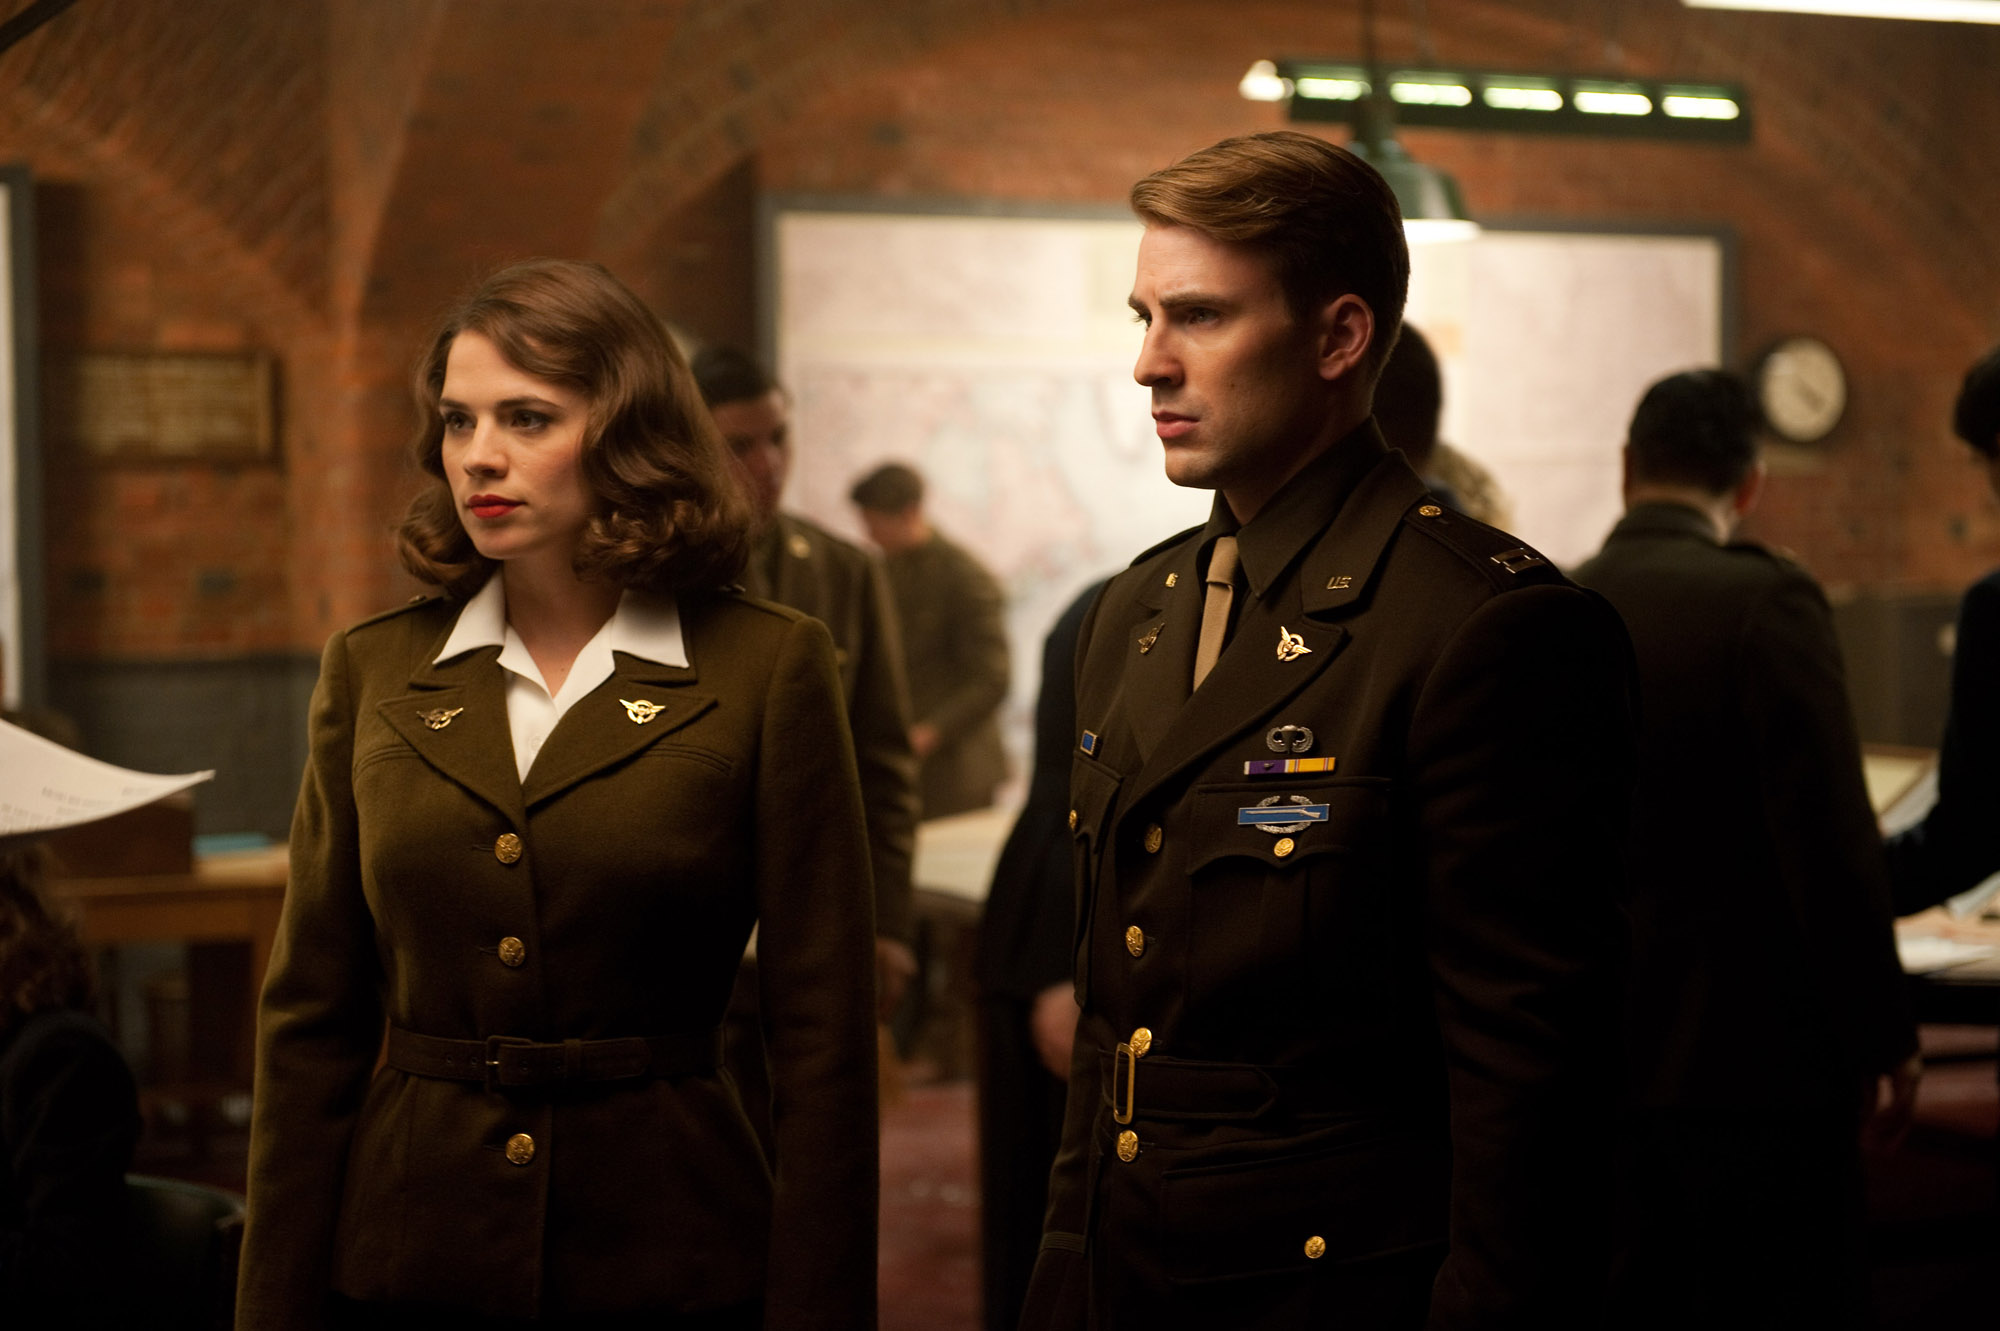 captain-america-the-first-avenger-movie-image-chris-evans-as-steve-rogers-hayley-atwell-as-peggy-carter.jpg